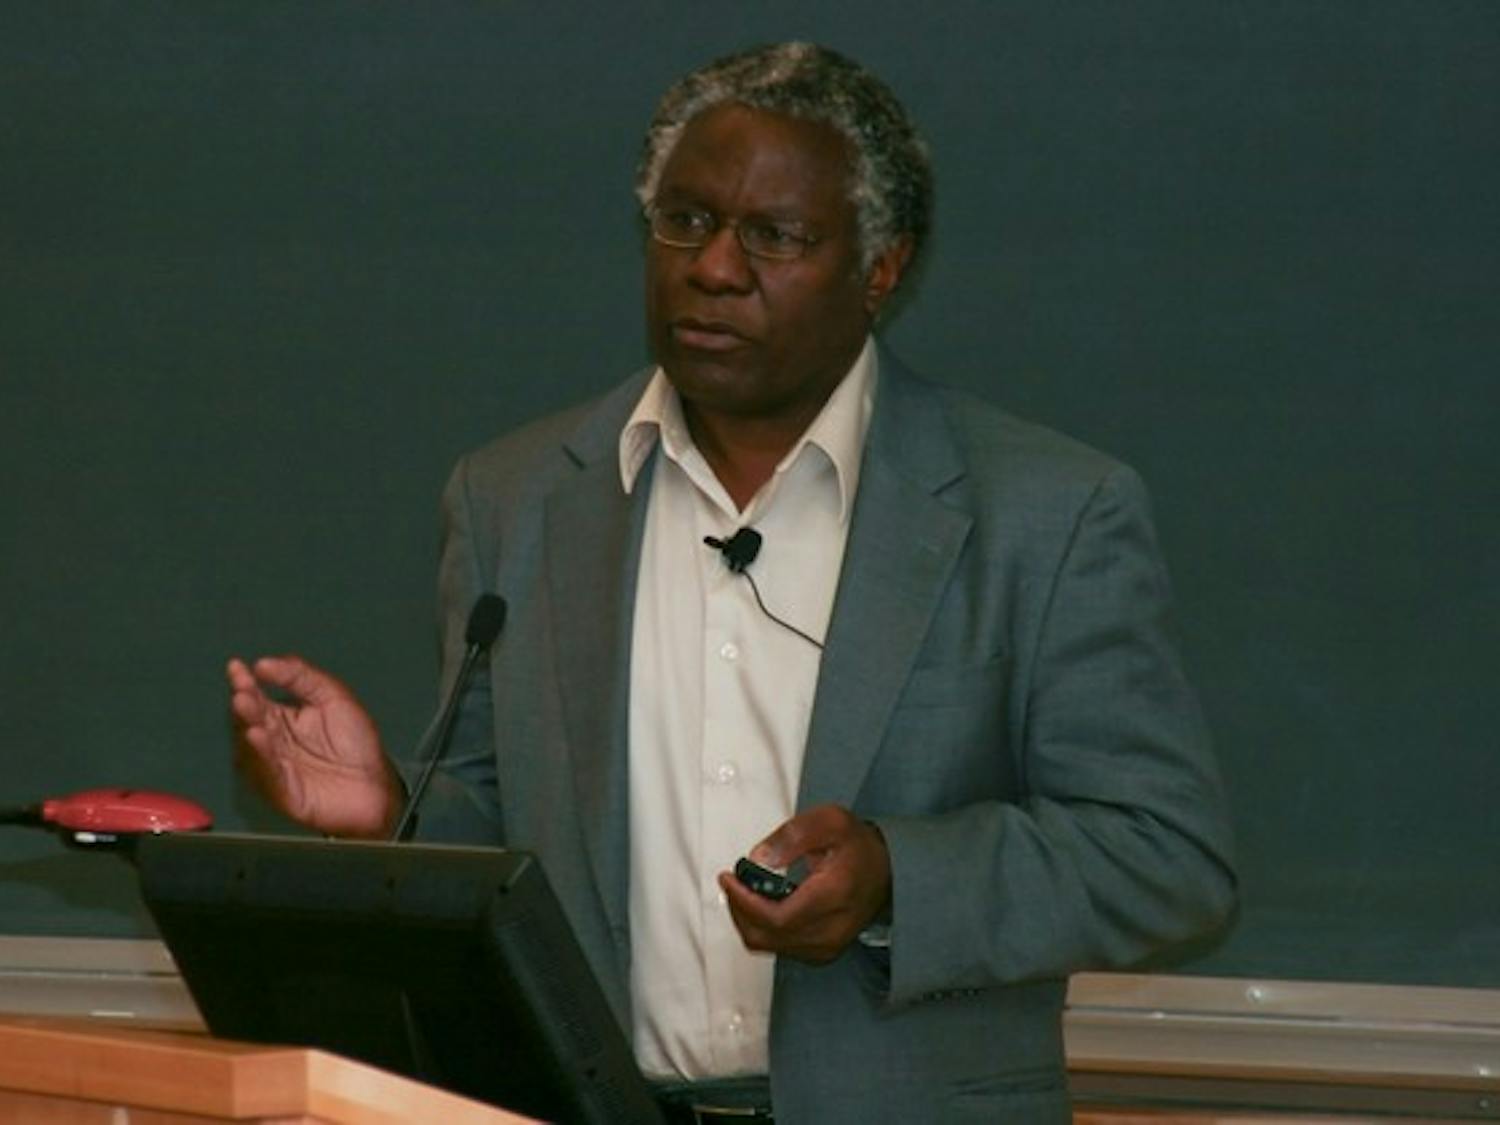 Harvard University professor Calestous Juma delivered a lecture about science, technology and diplomacy in the Haldeman Center on Wednesday.